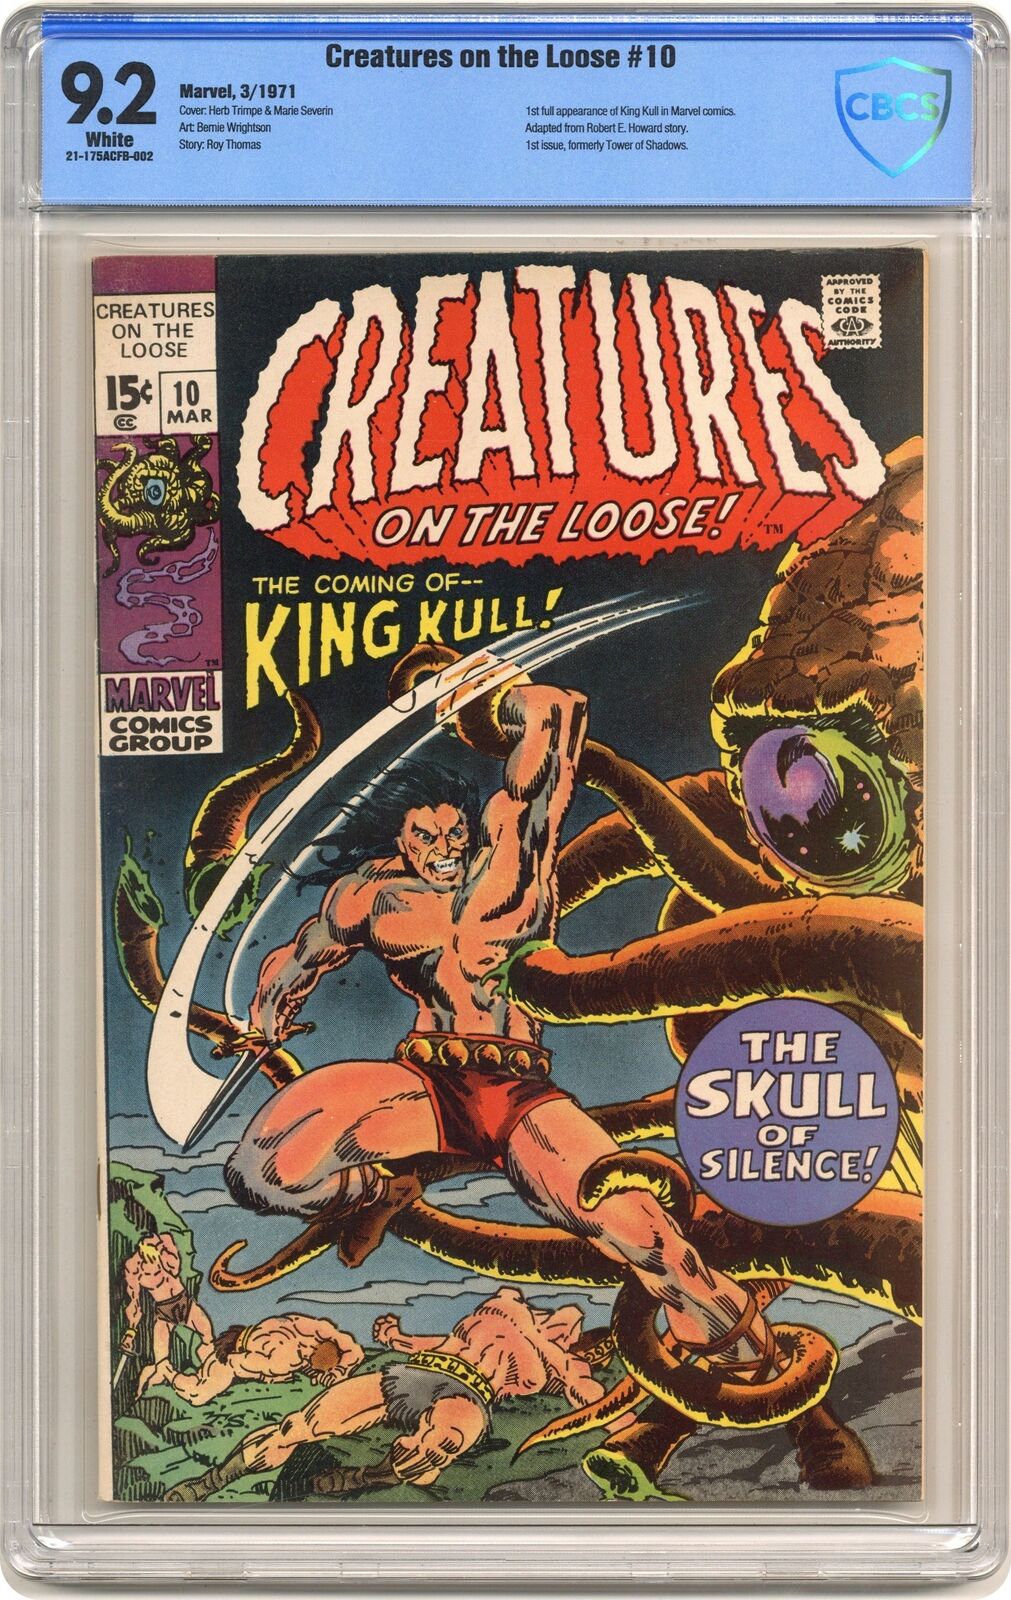 Creatures on the Loose #10 CBCS 9.2 1971 21-175ACFB-002 1st full app. King Kull